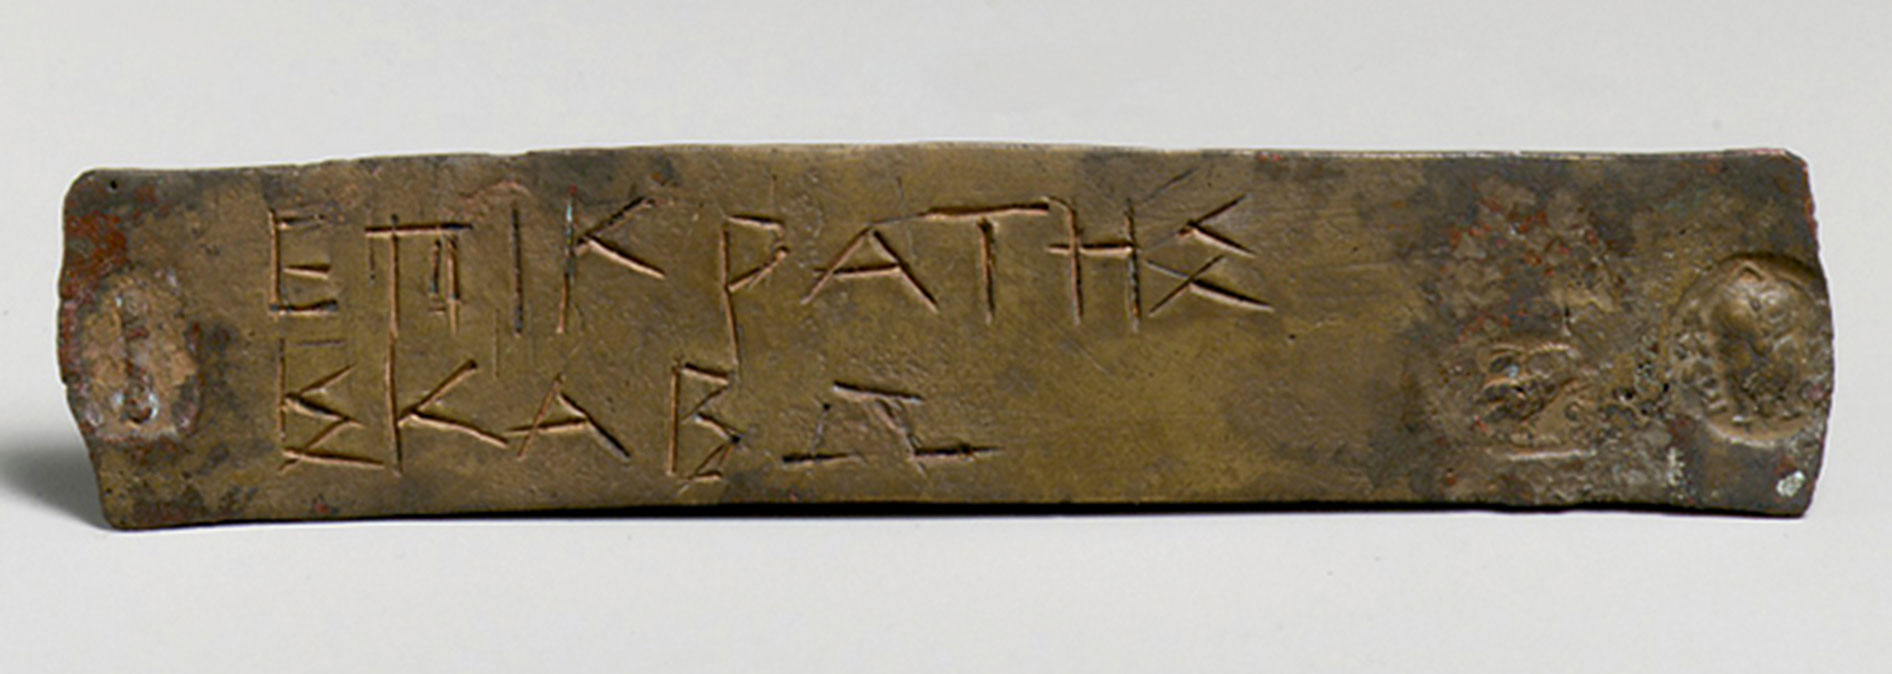 A juror’s identification ticket from fourth-century bee see Athens. Each Athenian citizen on jury duty for a given year was issued a bronze plaque carrying an official stamp and his name. On the day of a trial, the prospective jurors appeared before a magistrate in charge of selecting the jury and their plaques were placed in rows in a device used to ensure random selection.